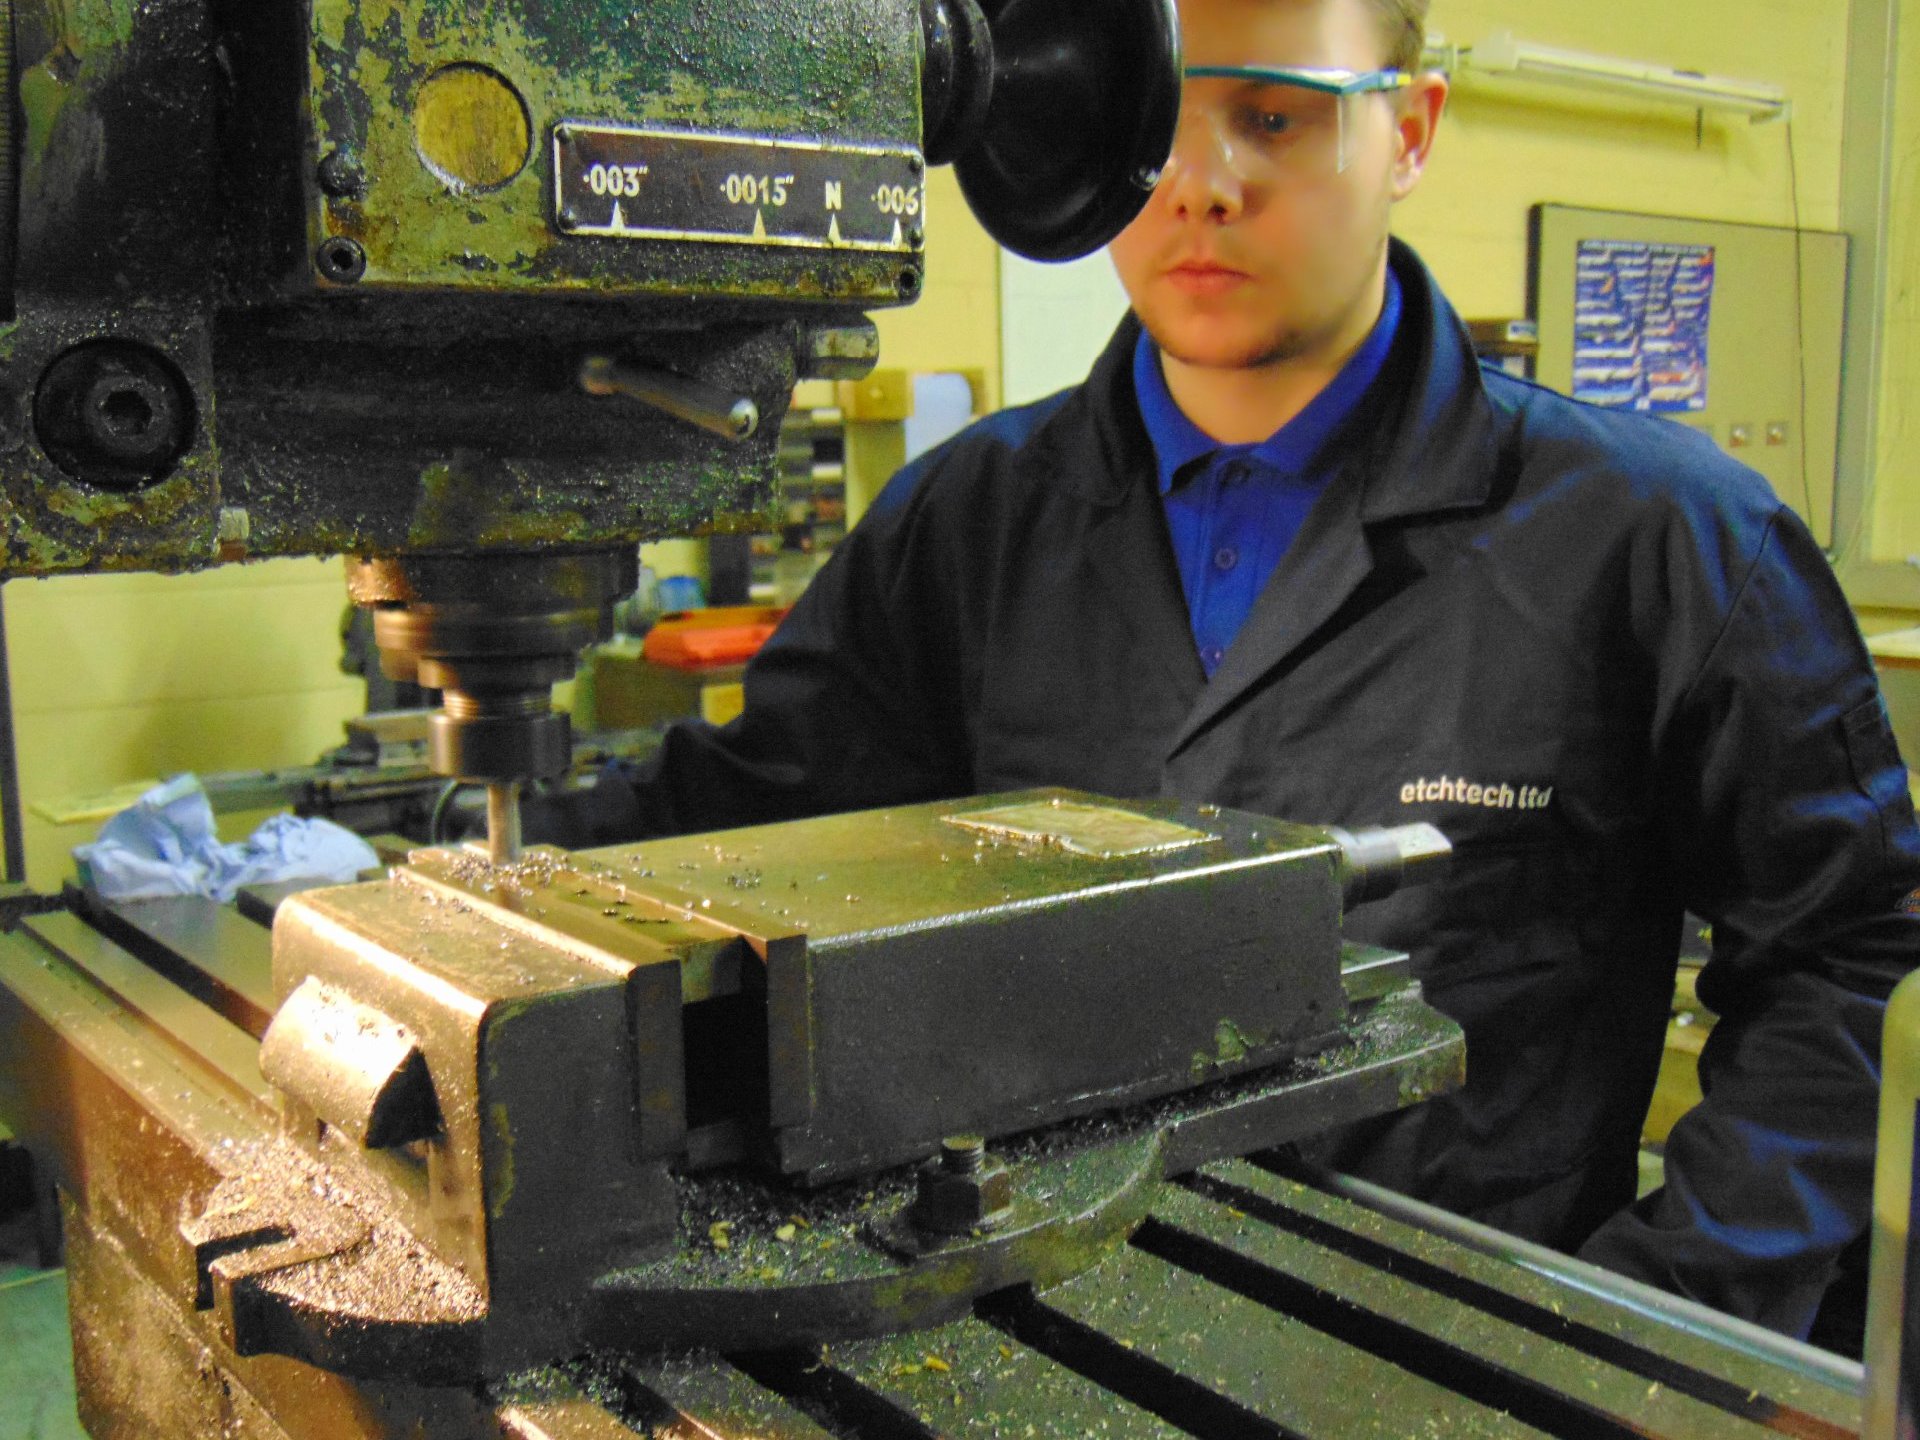 tool making for forming photo etch components in our fully equipped tool room at etch tech